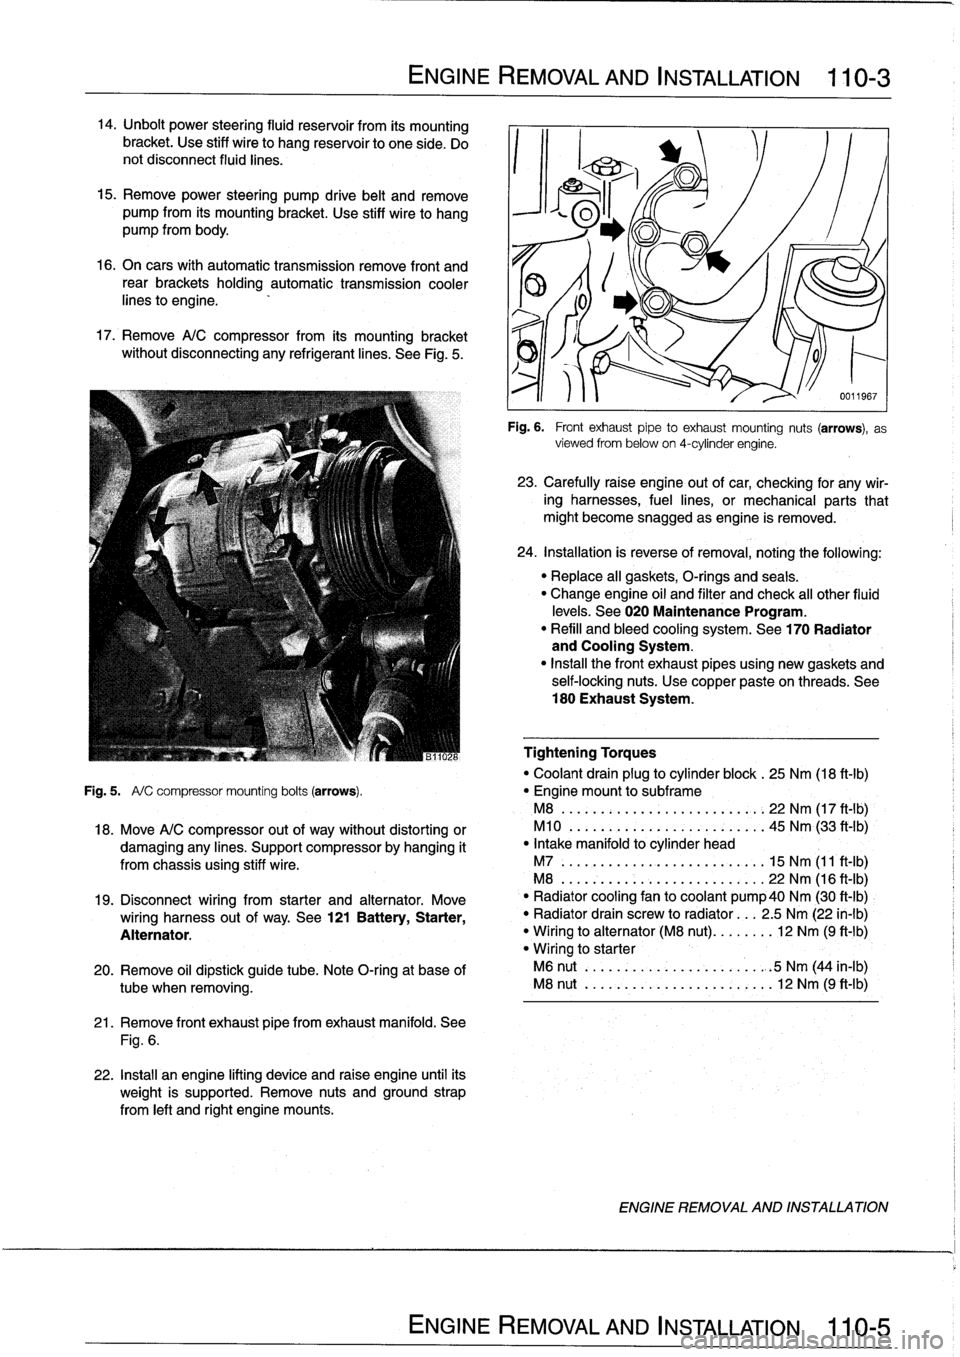 BMW 318i 1996 E36 Workshop Manual 14
.
Unbolt
power
steering
fluid
reservoir
from
íts
mounting
bracket
.
Use
stiff
wire
to
hang
reservoir
to
one
side
.
Do
not
disconnect
fluid
lines
.

15
.
Remove
power
steering
pump
drive
belt
and
r